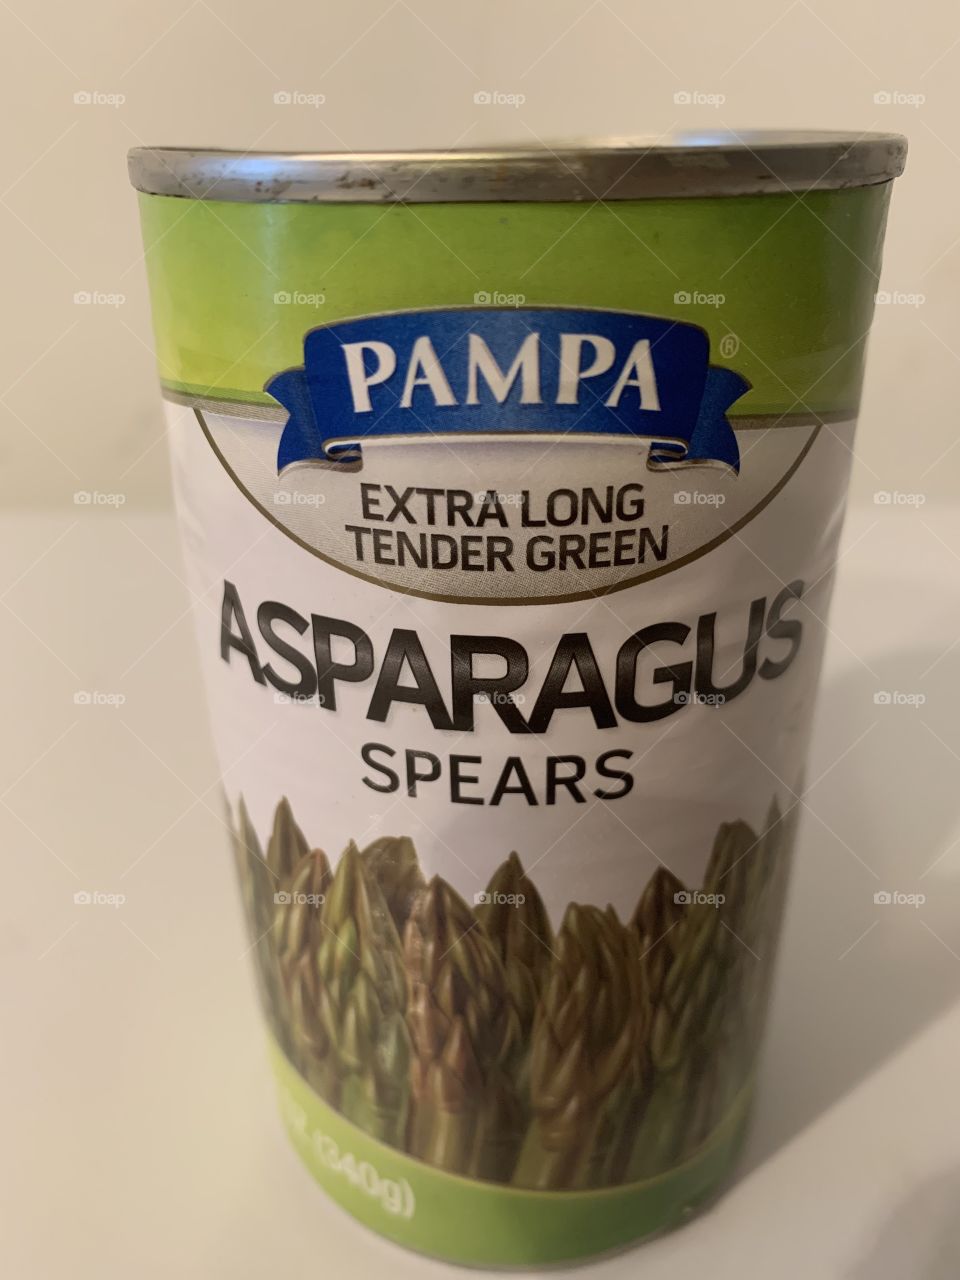 YOU GOTTA LOVE PAMPA ASPARAGUS FOR US! 